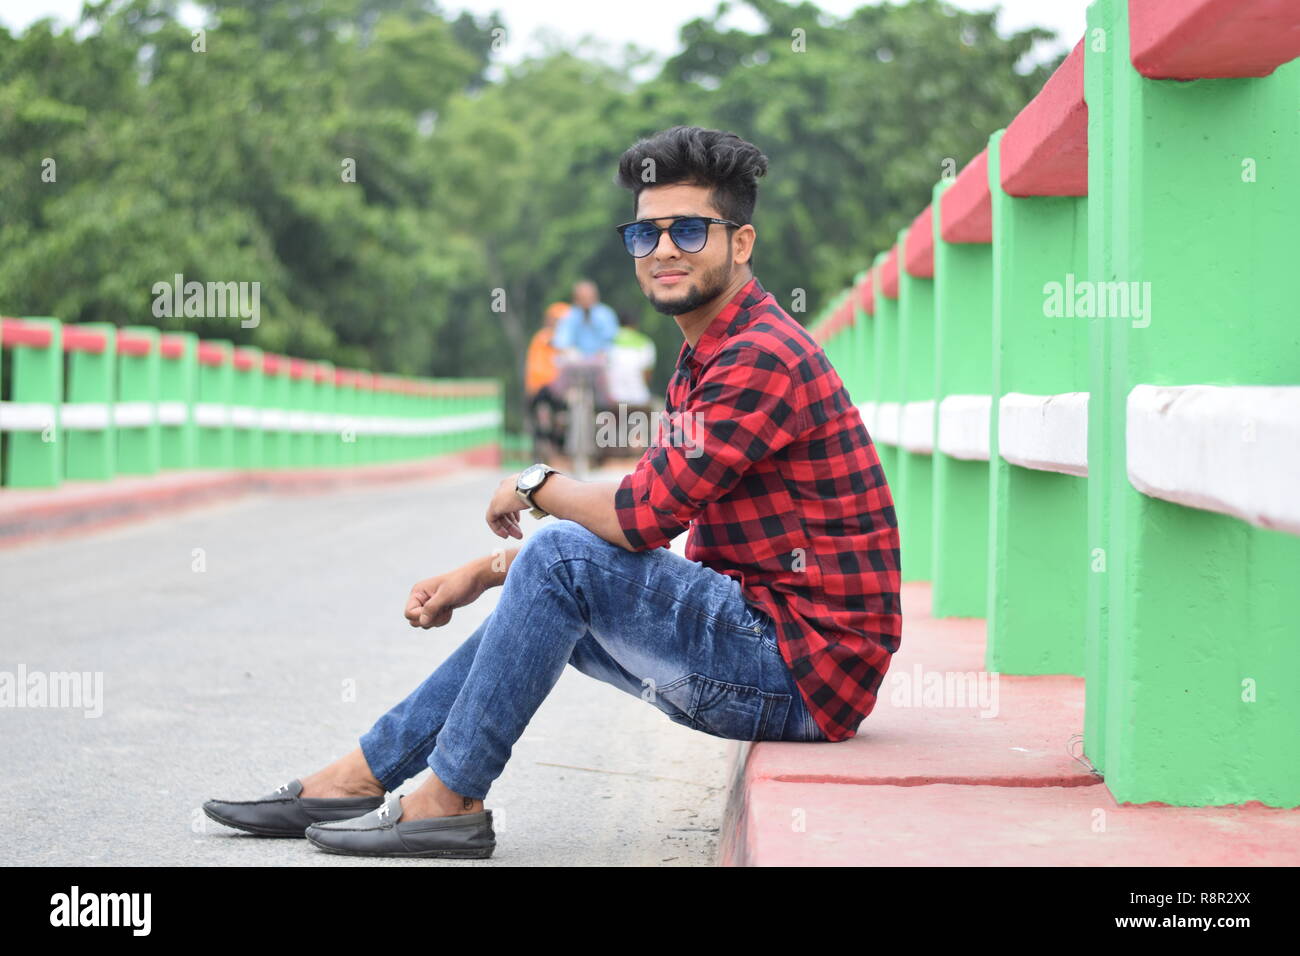 Photo pose for boys Images • Mr. Atharva...153 (@479162987) on ShareChat-cheohanoi.vn